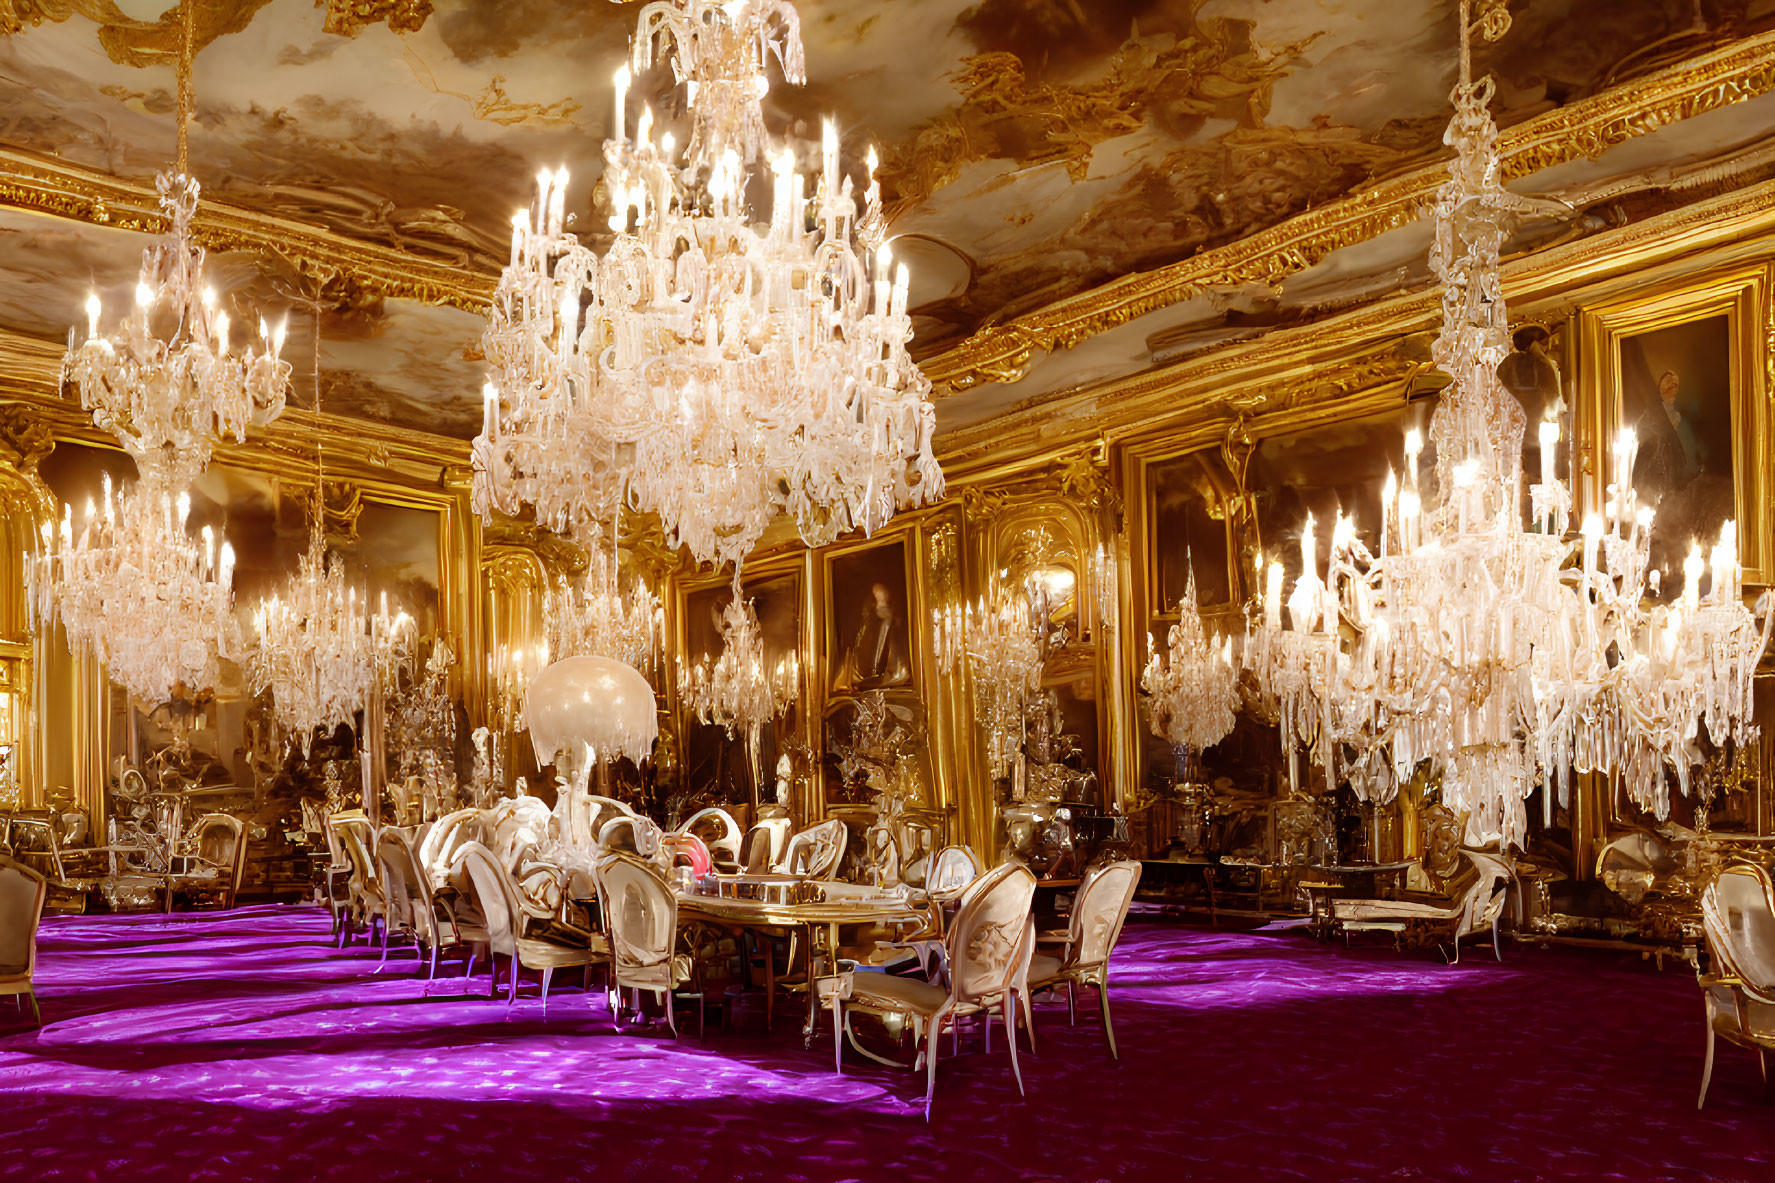 Luxurious Room with Golden Walls, Crystal Chandeliers, Mirrors, Purple Carpet, and Furniture